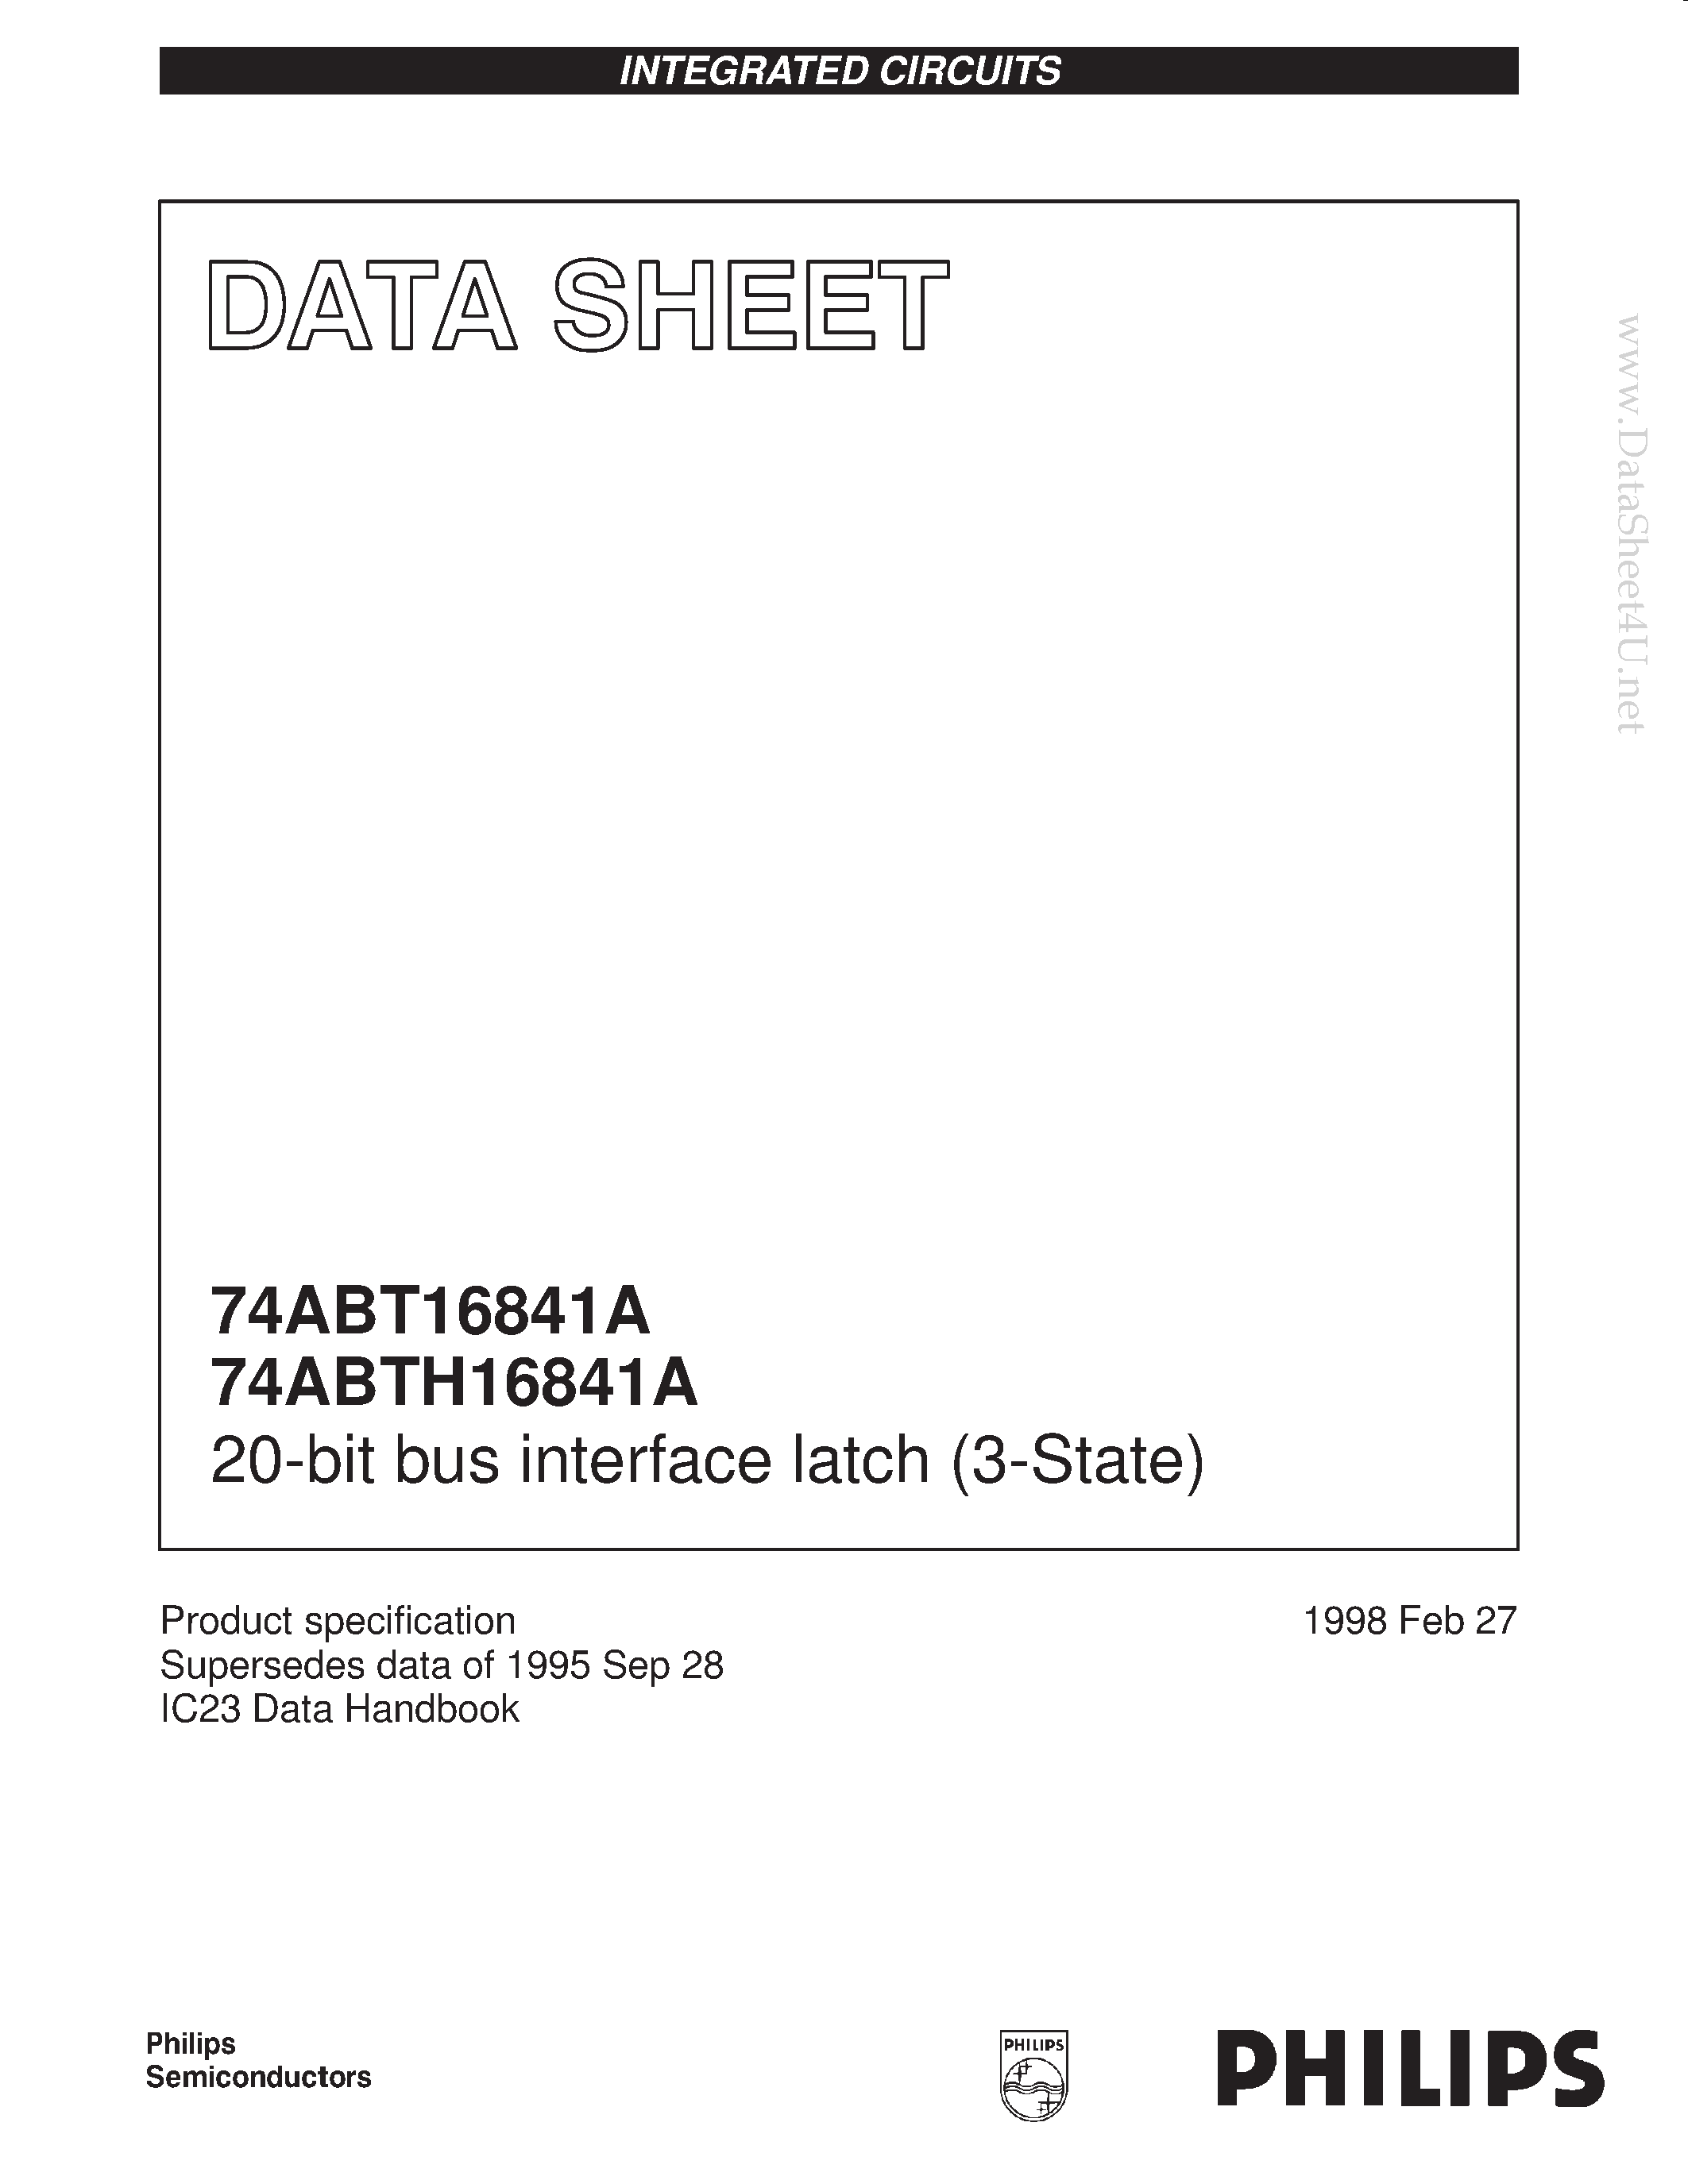 Datasheet 74ABTH16841A - 20-bit bus interface latch 3-State page 1